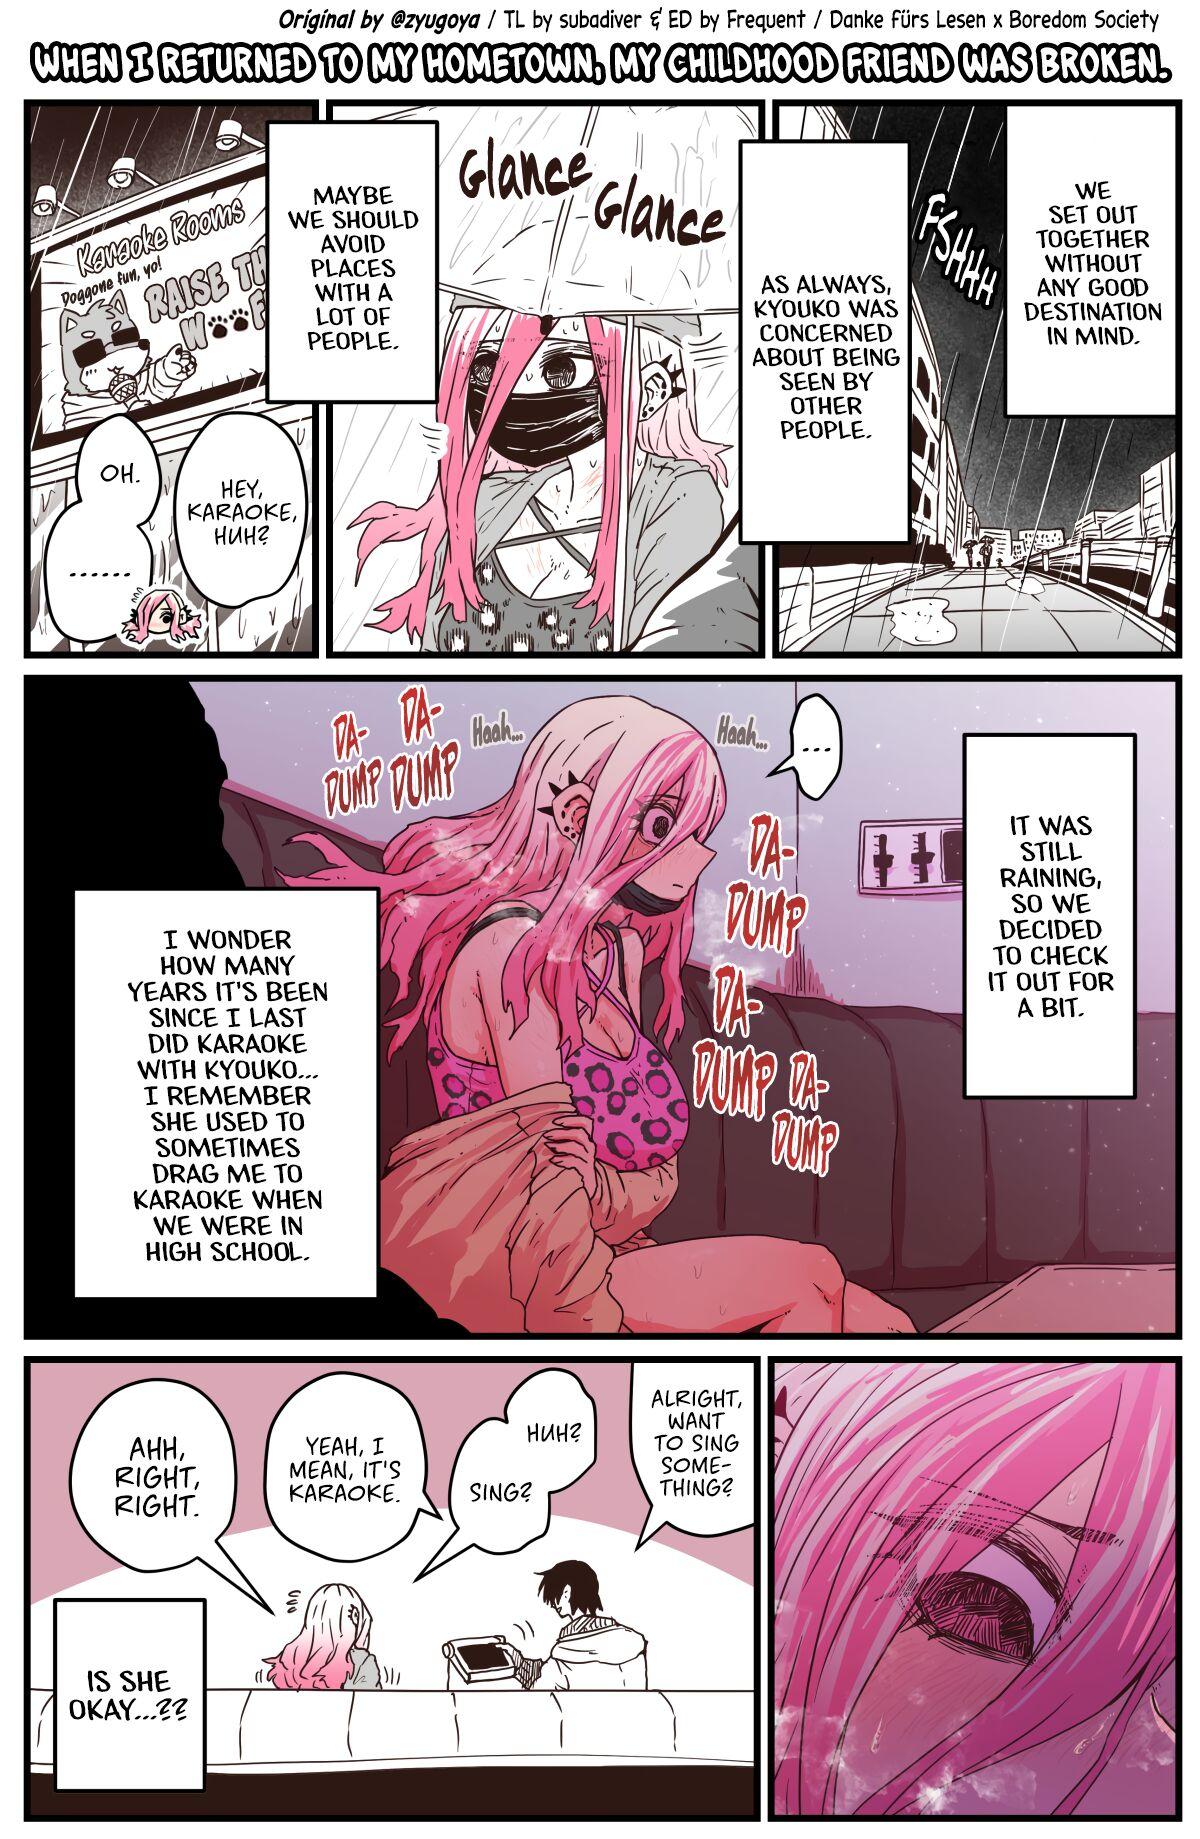 This When I Returned to My Hometown, My Childhood Friend was Broken - Original Big Booty - Page 8